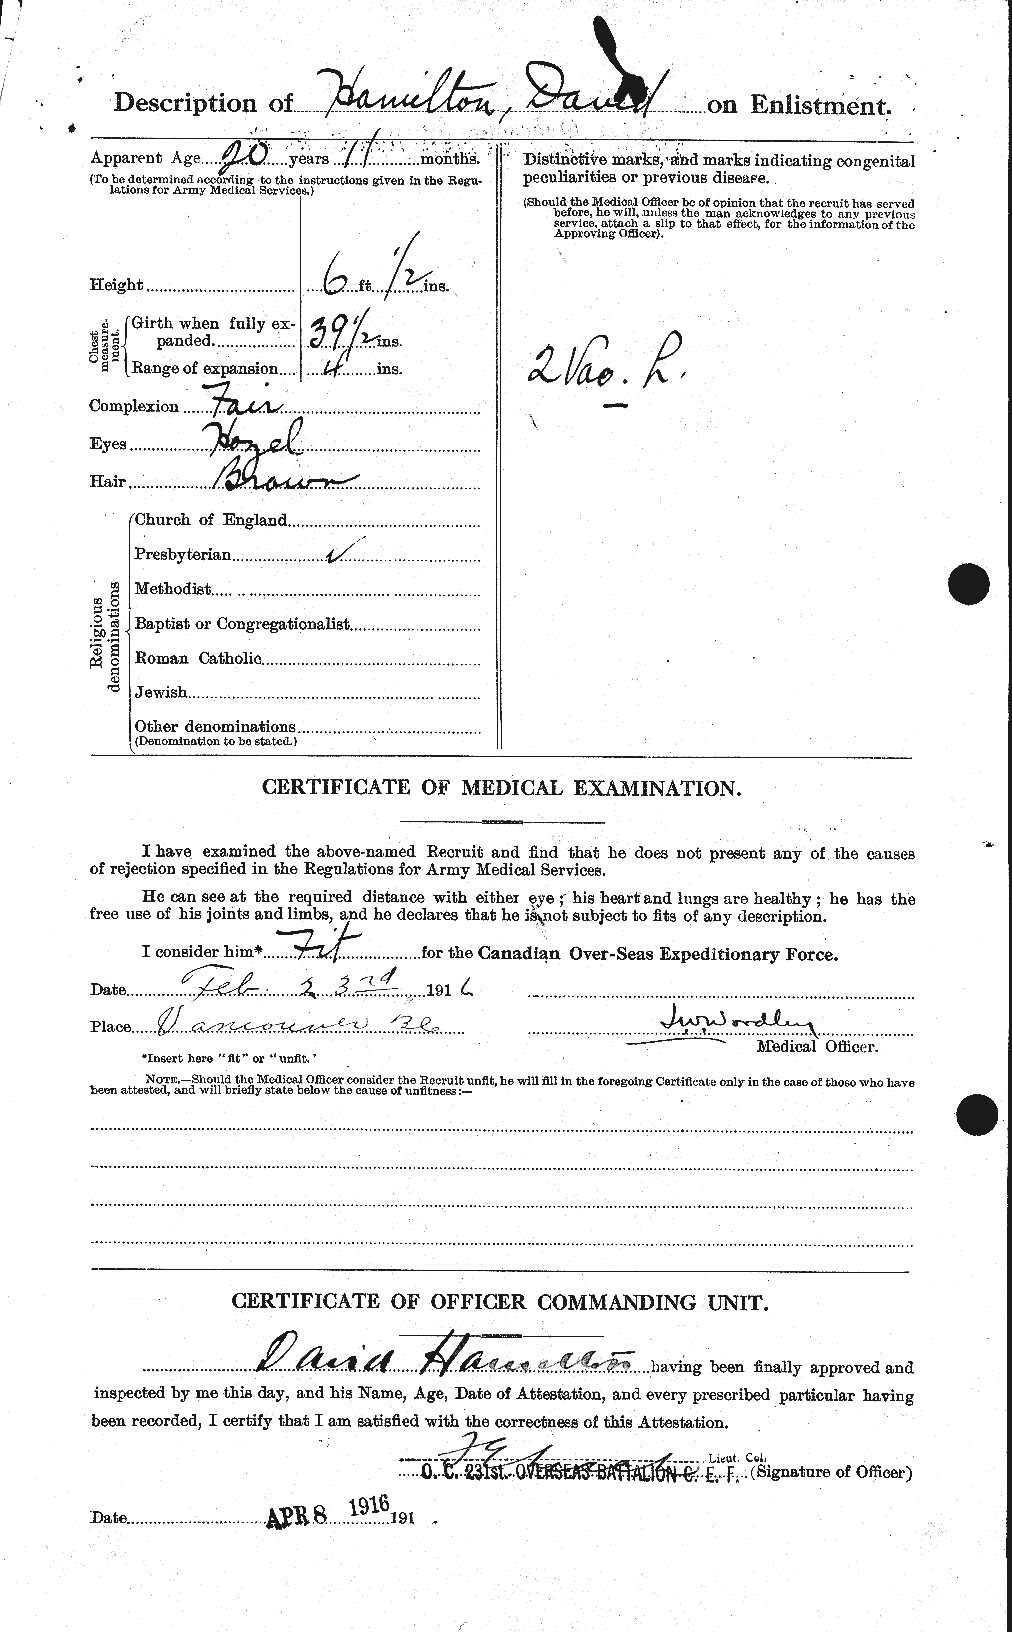 Personnel Records of the First World War - CEF 375338b